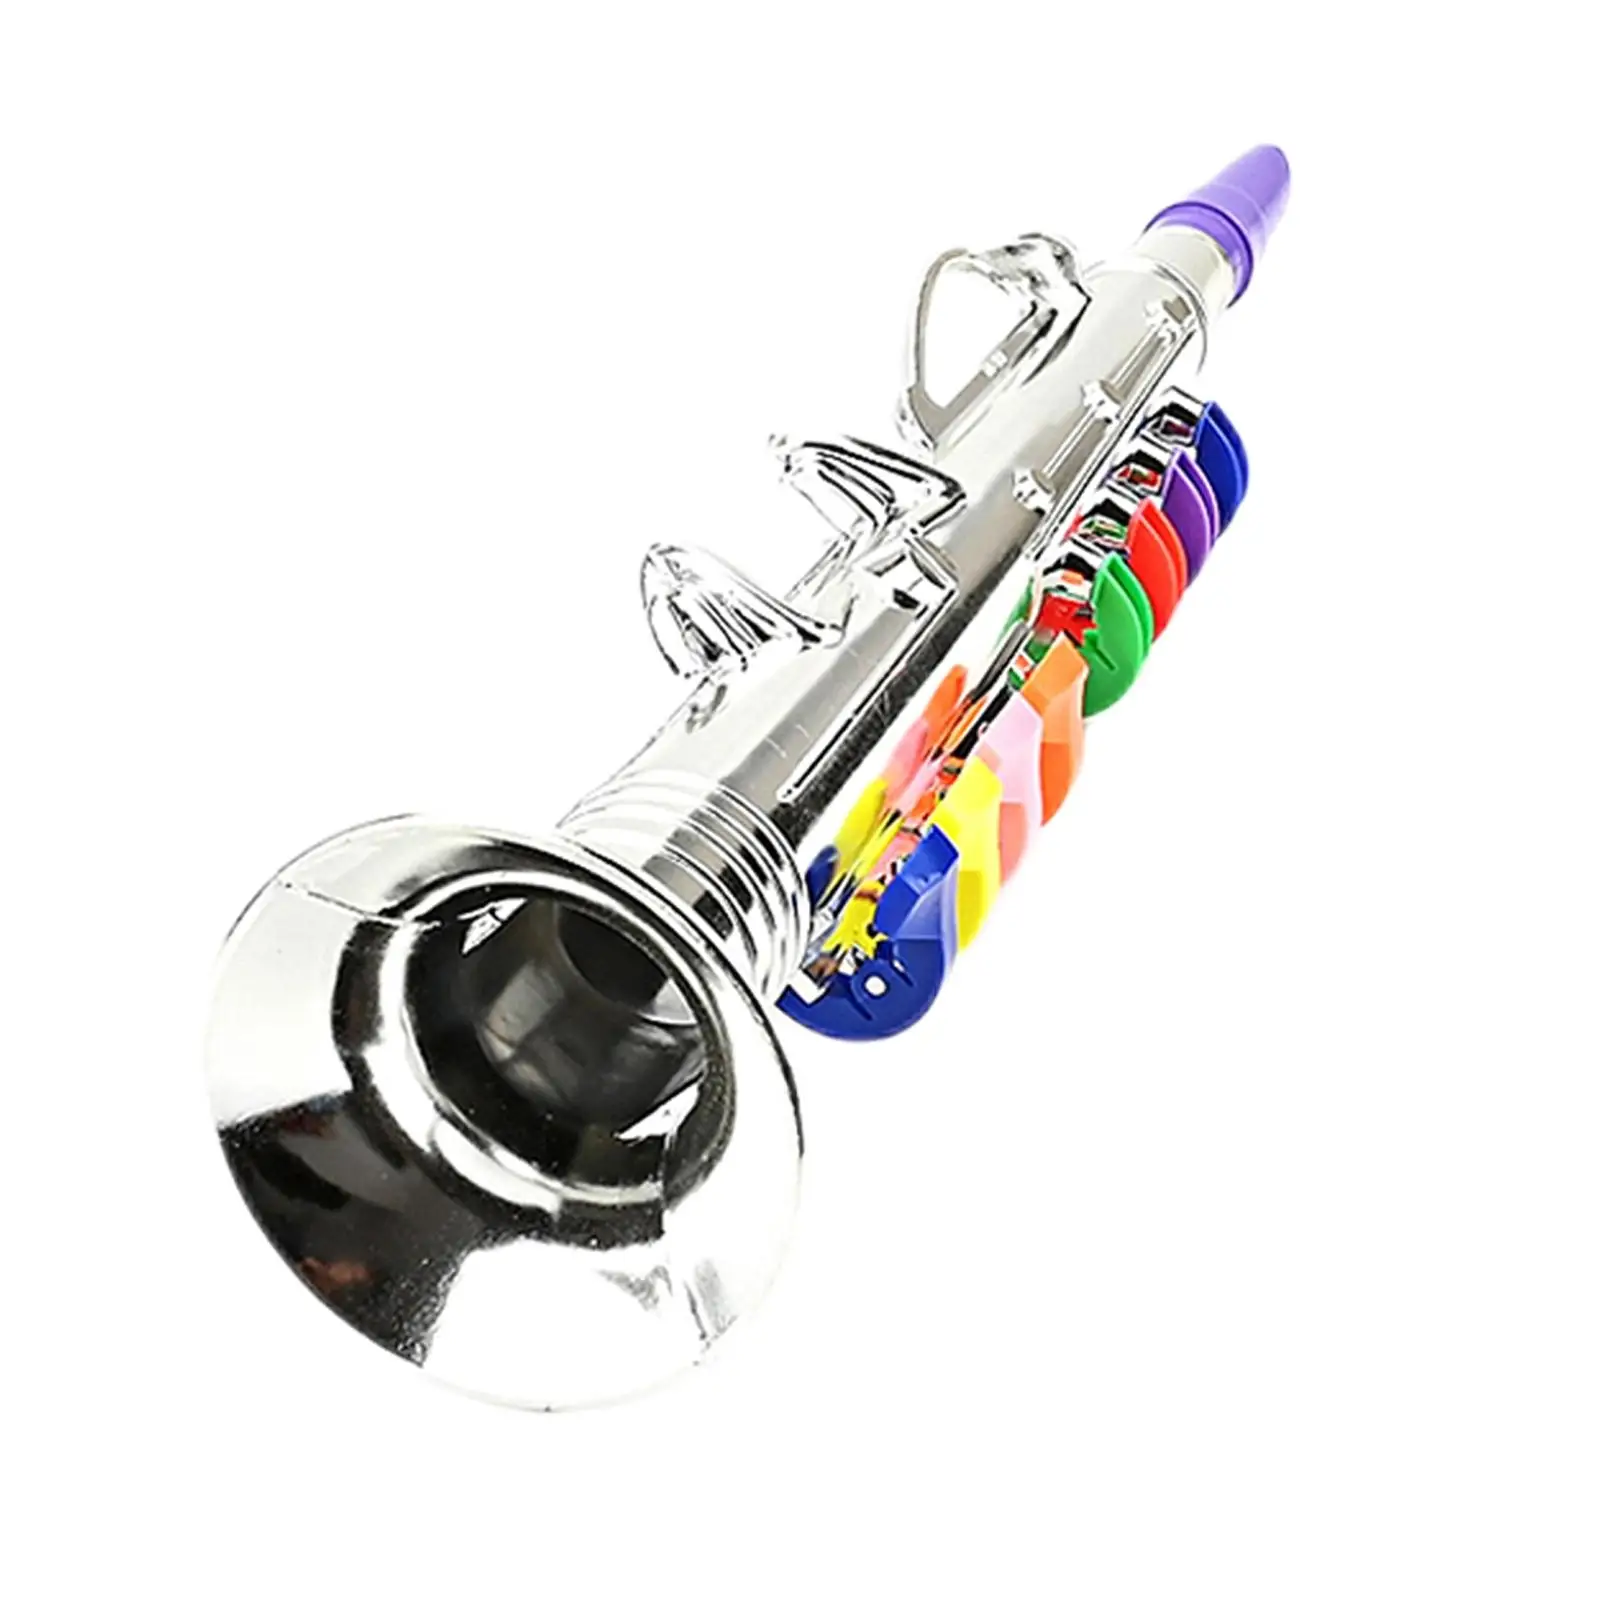 8 Notes Kids Saxophone Trumpet Clarinet Simulation Music Playing Educational Durable Portable Mini for Party Toy Gifts Children